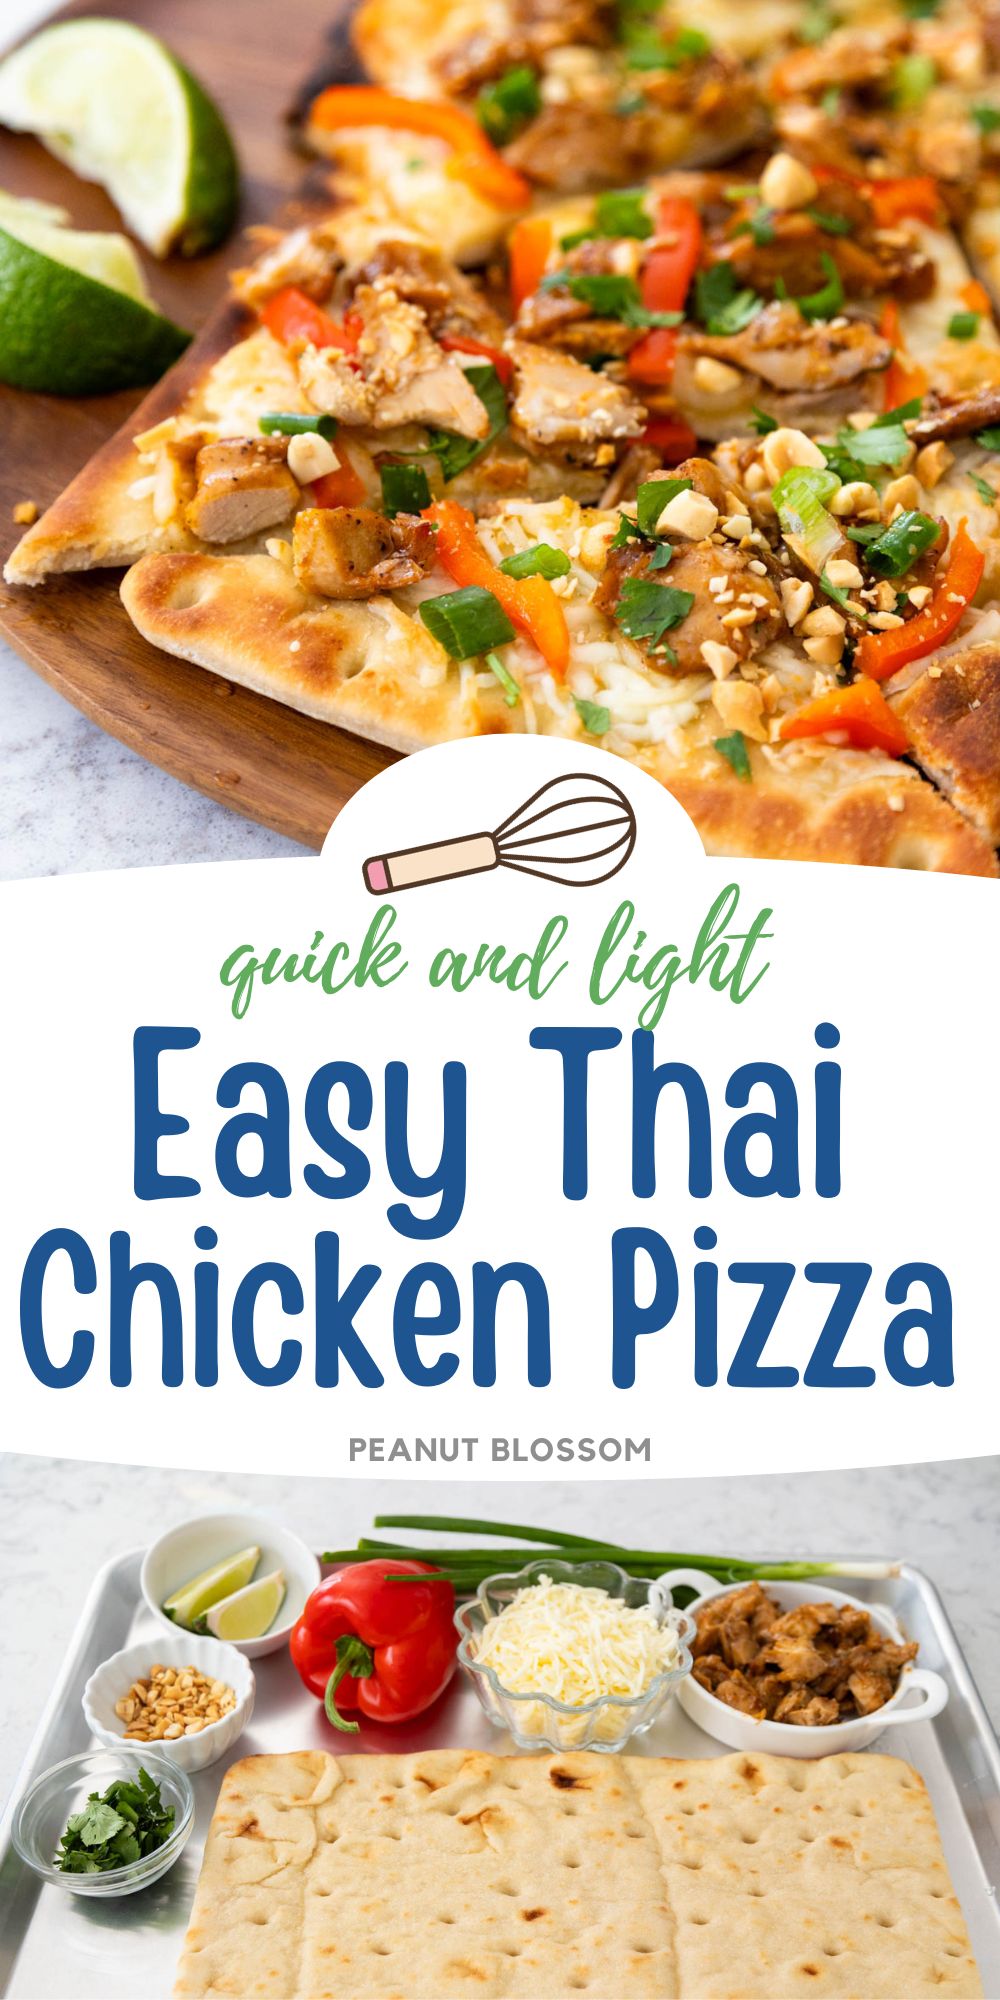 The photo collage shows the baked Thai chicken pizza next to a photo of all the ingredients used to make it.